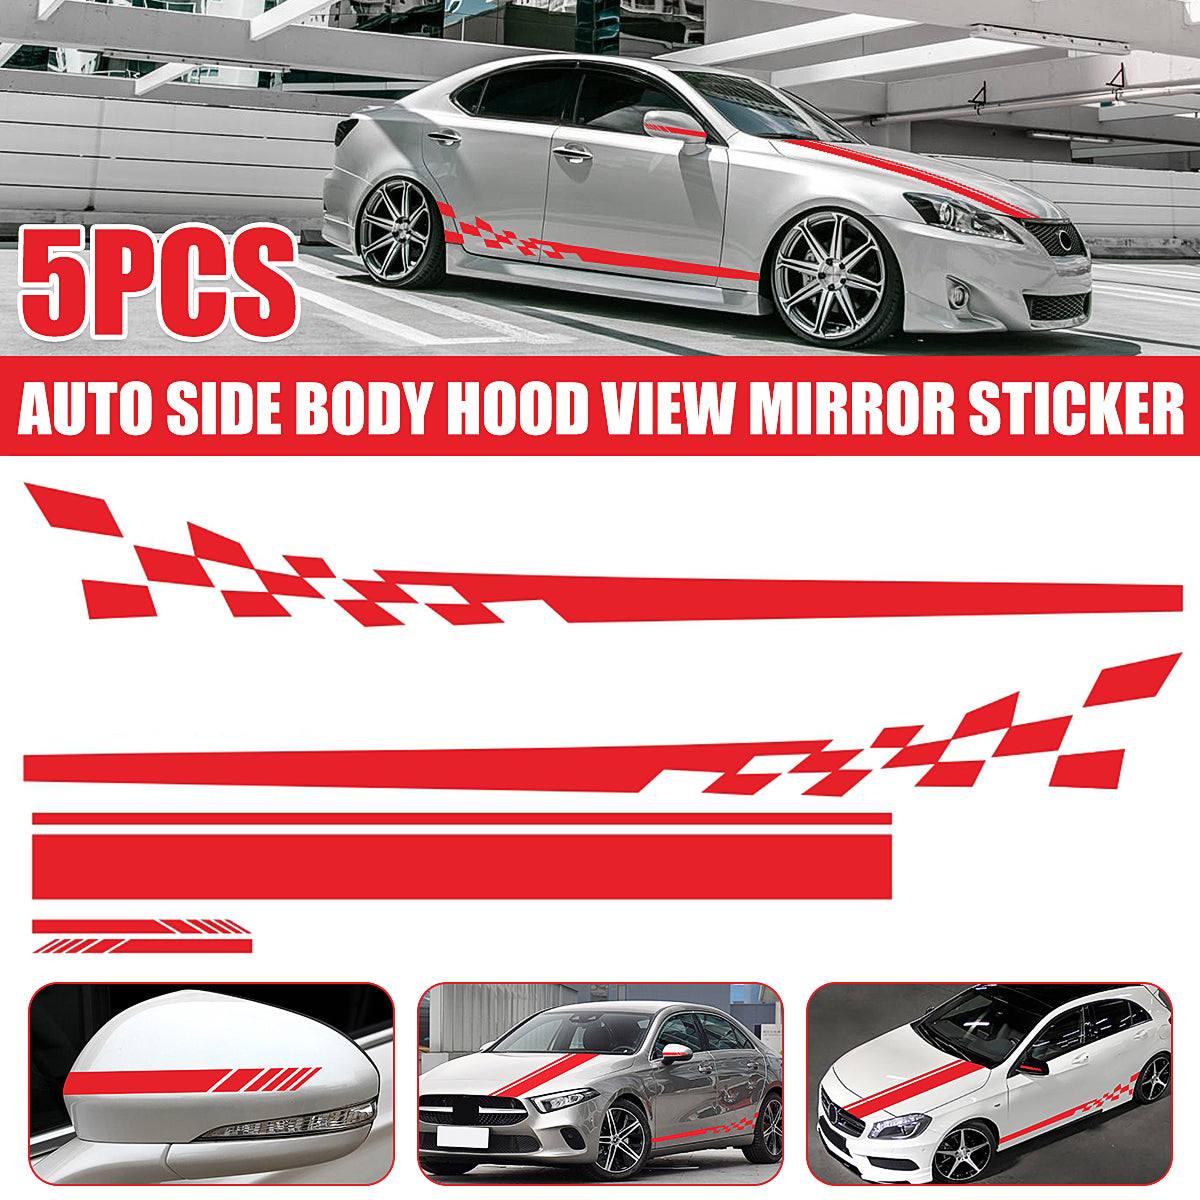 Firebrick 5pcs Car Stickers Stripes Graphics Side Body Hood Rearview Mirror Decal Trim